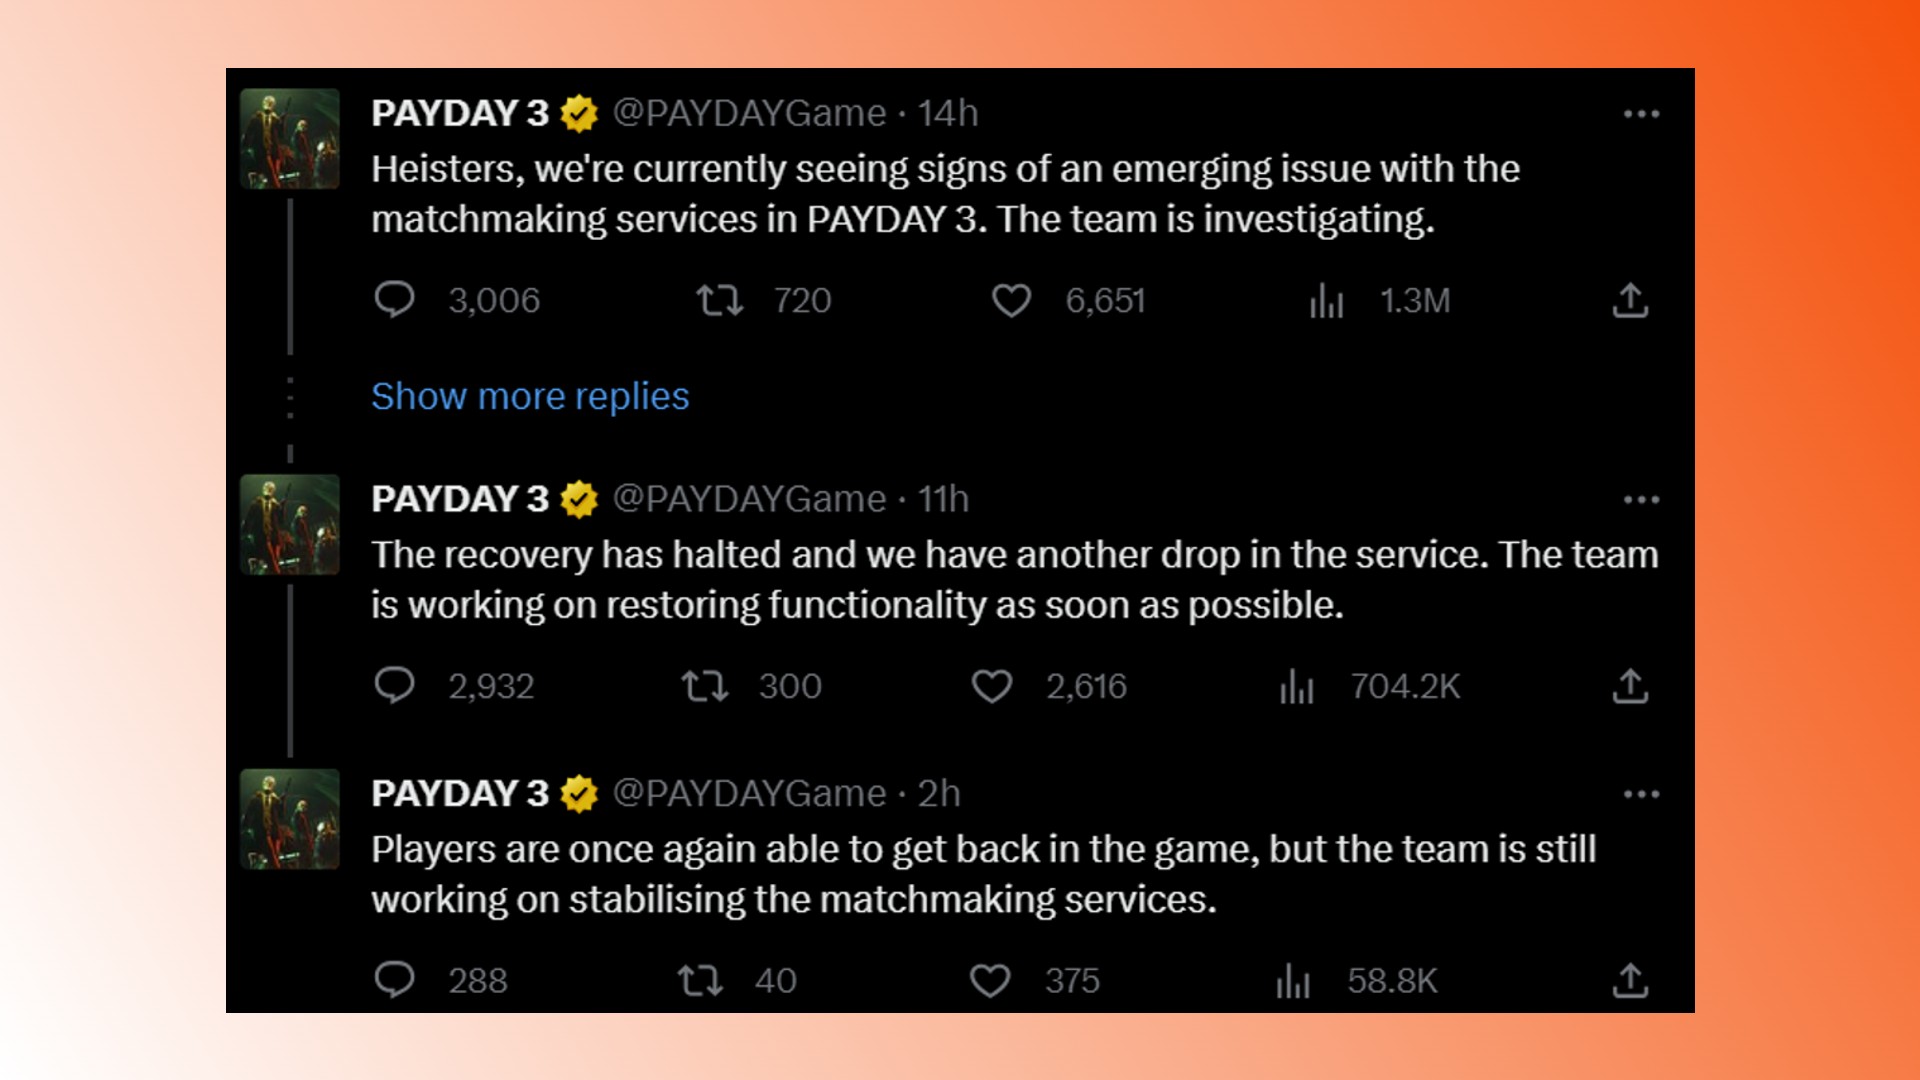 Payday 3 servers: A response from Payday 3 developer Starbreeze relating to matchmaking problems in the FPS game